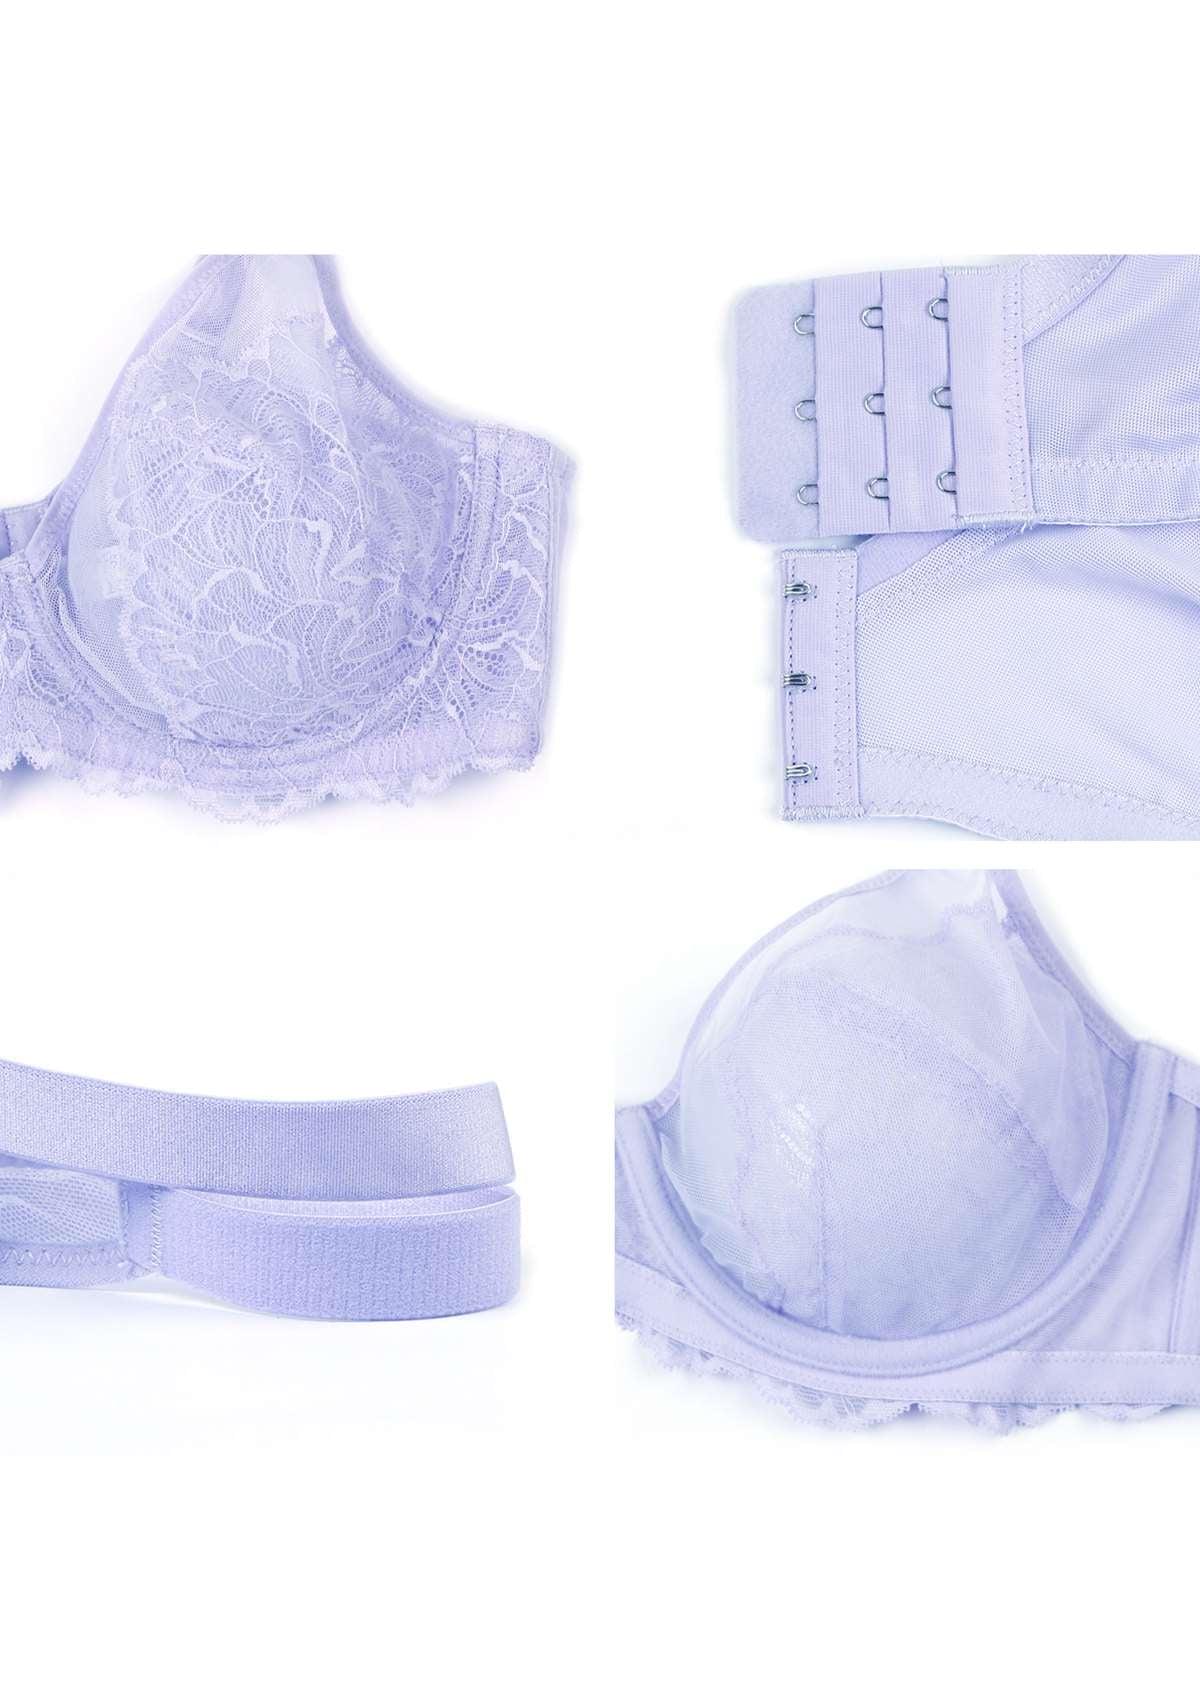 HSIA Blossom Transparent Lace Bra: Plus Size Wired Back Smoothing Bra - Light Purple / 36 / I